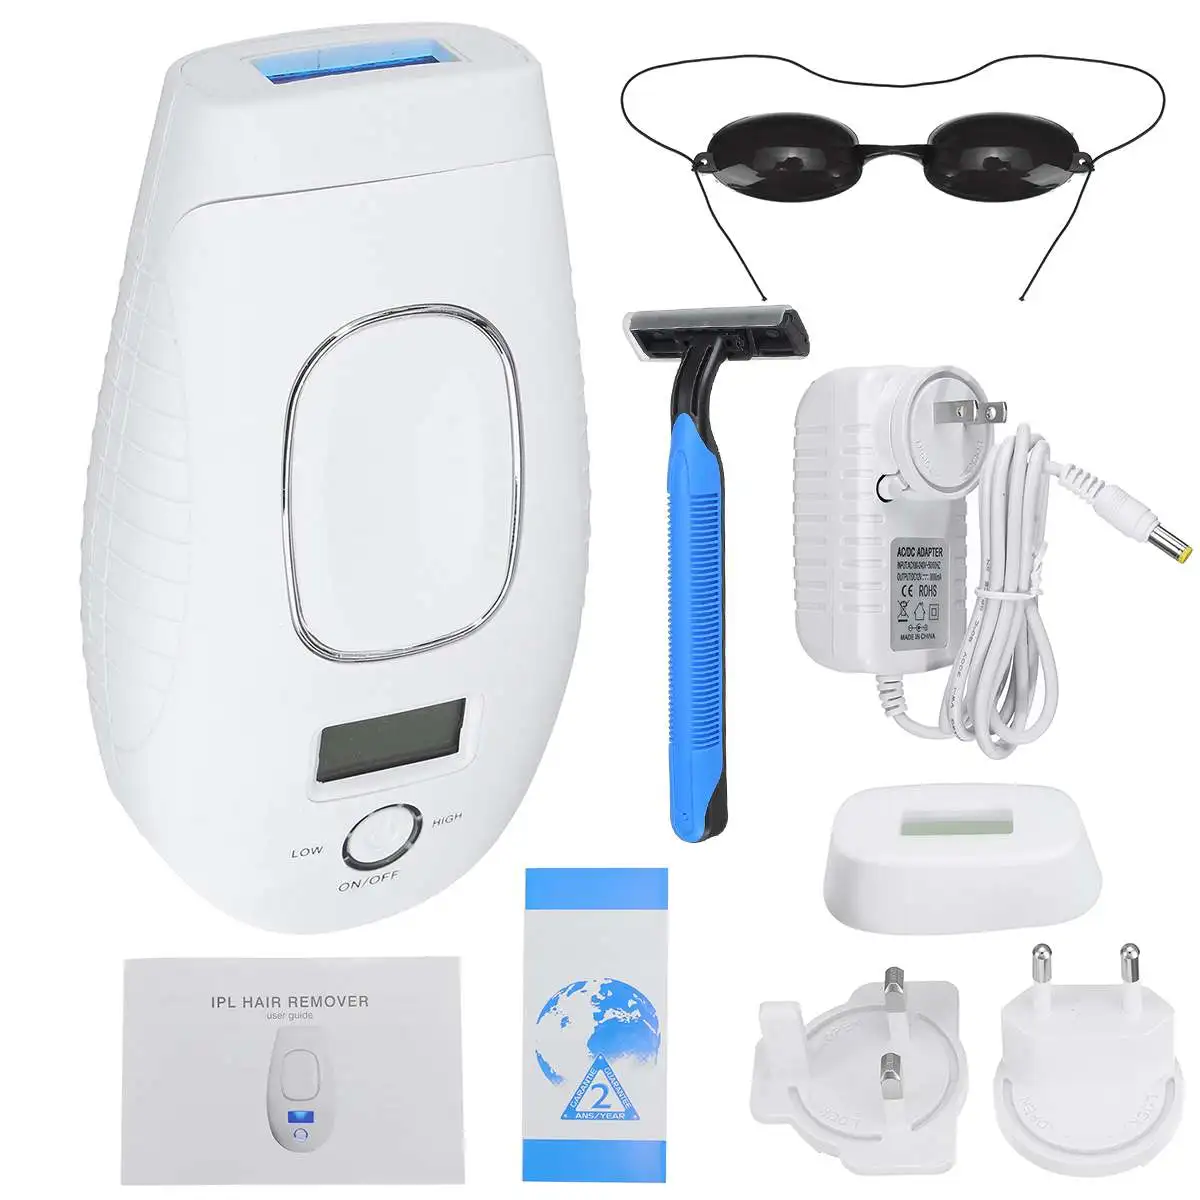 

Mini Handheld Laser Epilator 600000 Flashes Depilador Facial Permanent Hair Removal Device Whole Body Laser Hair Remover Machine